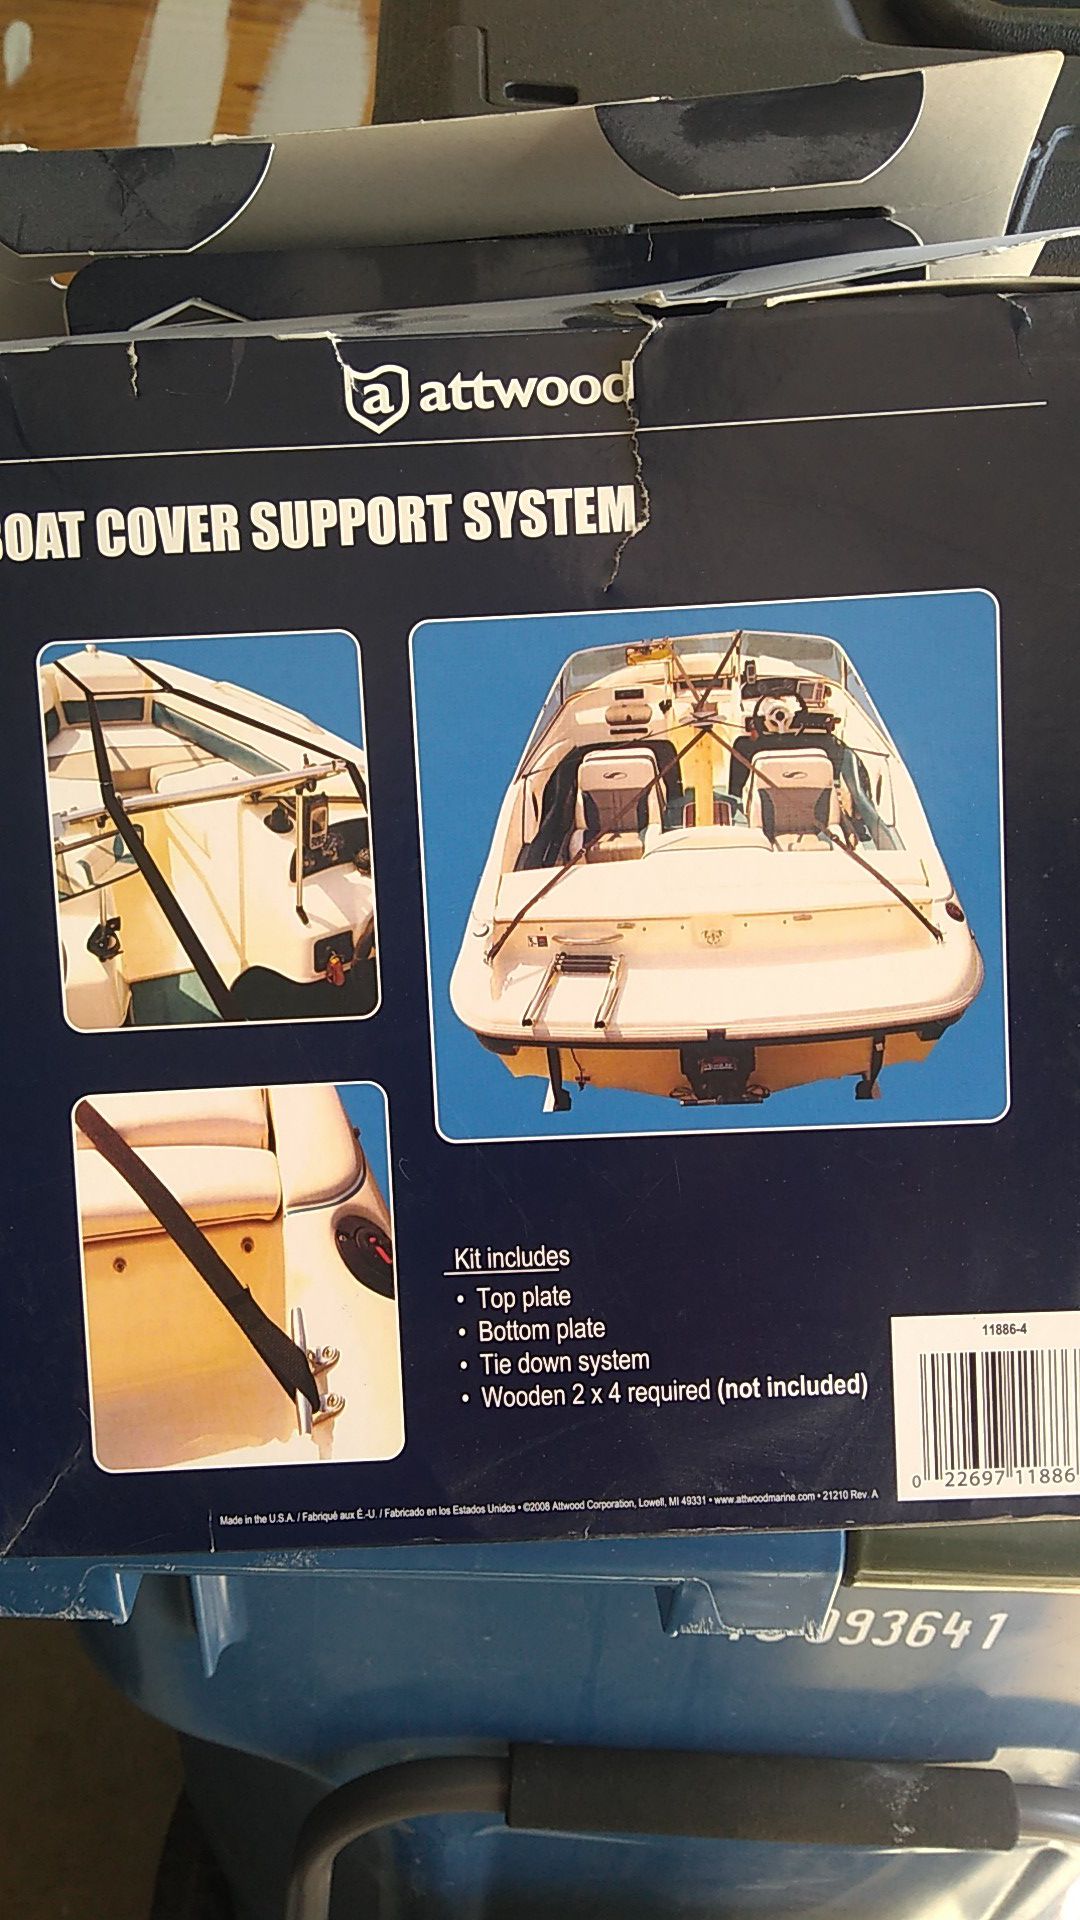 Attwood Boat Cover Support System